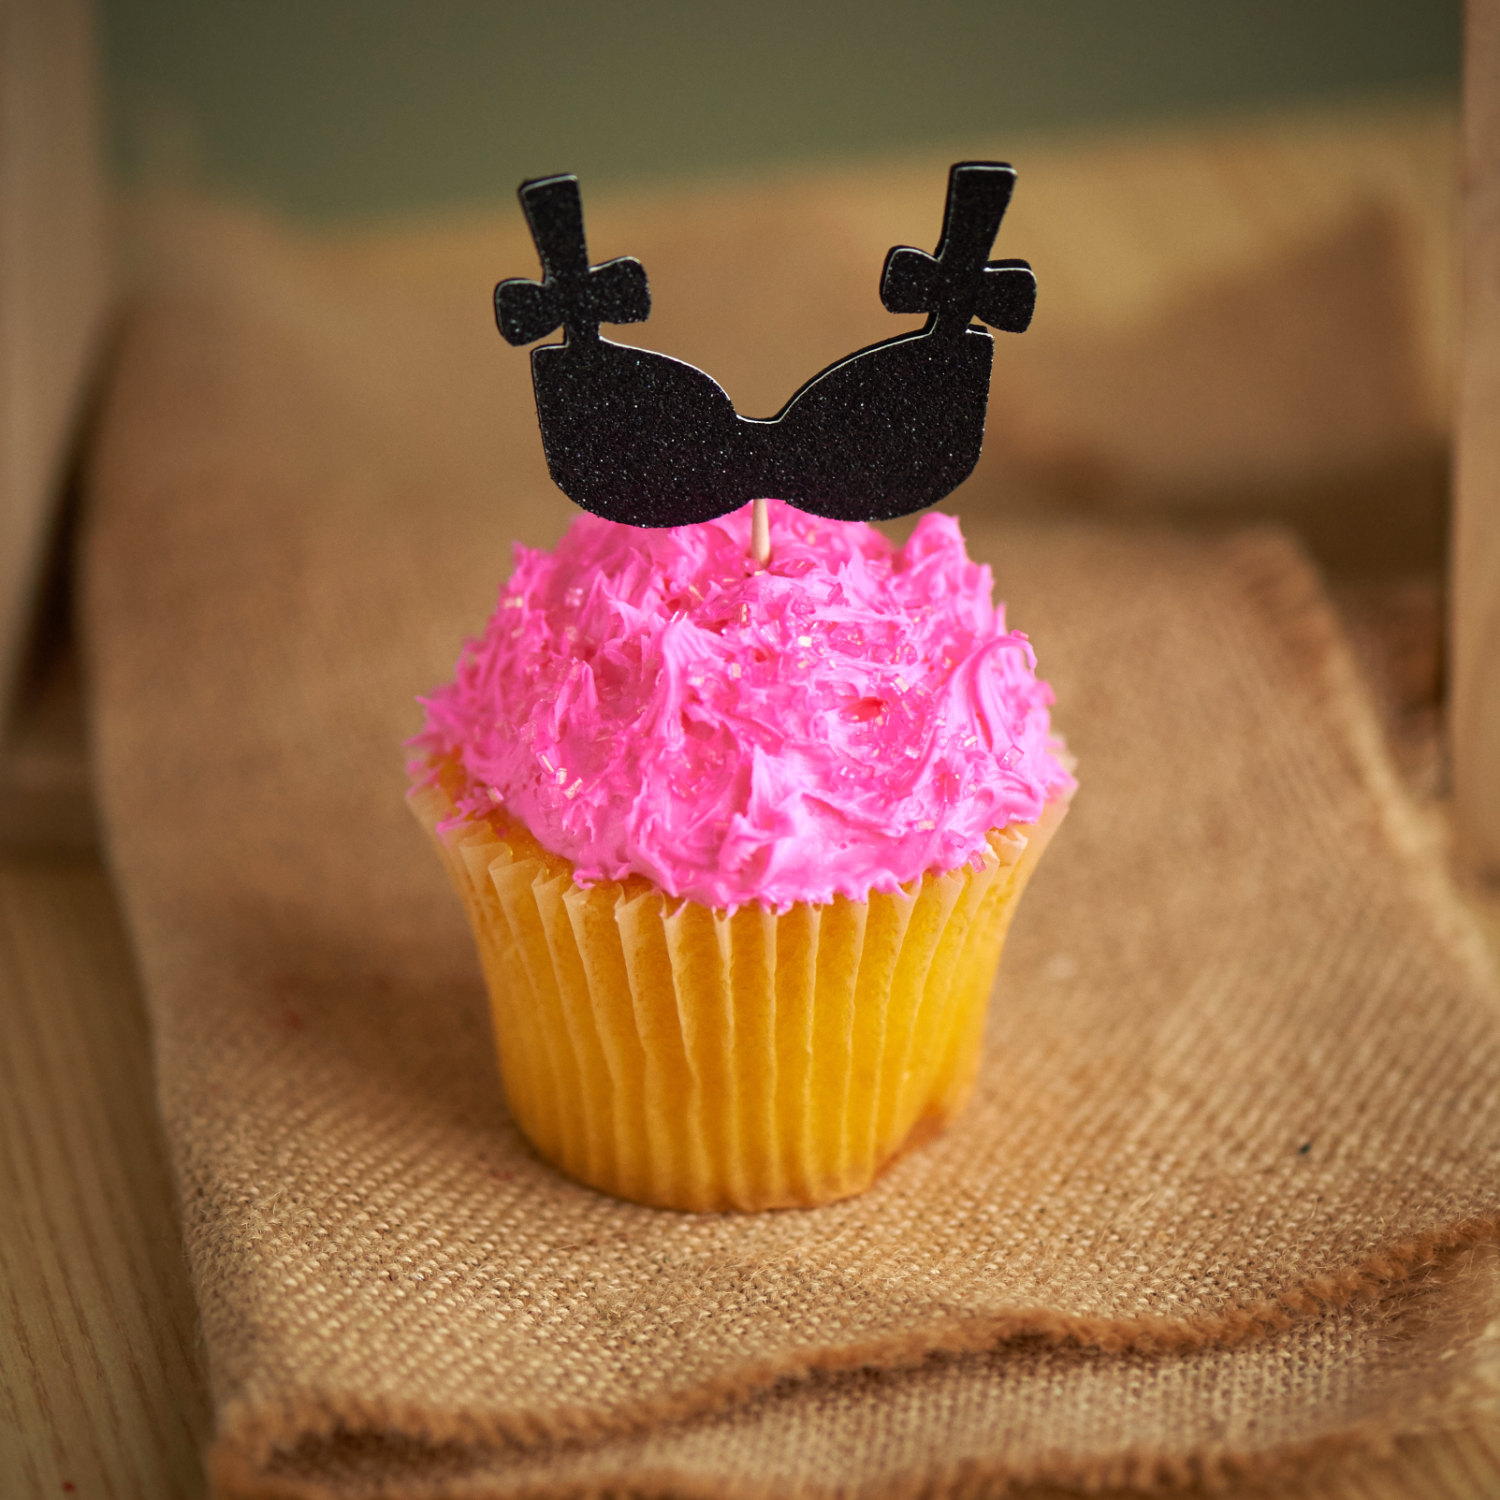 black bra cupcake toppers on hot pink cupcake by confetti momma party | fun bachelorette party ideas | https://emmalinebride.com/planning/fun-bachelorette-party-ideas/